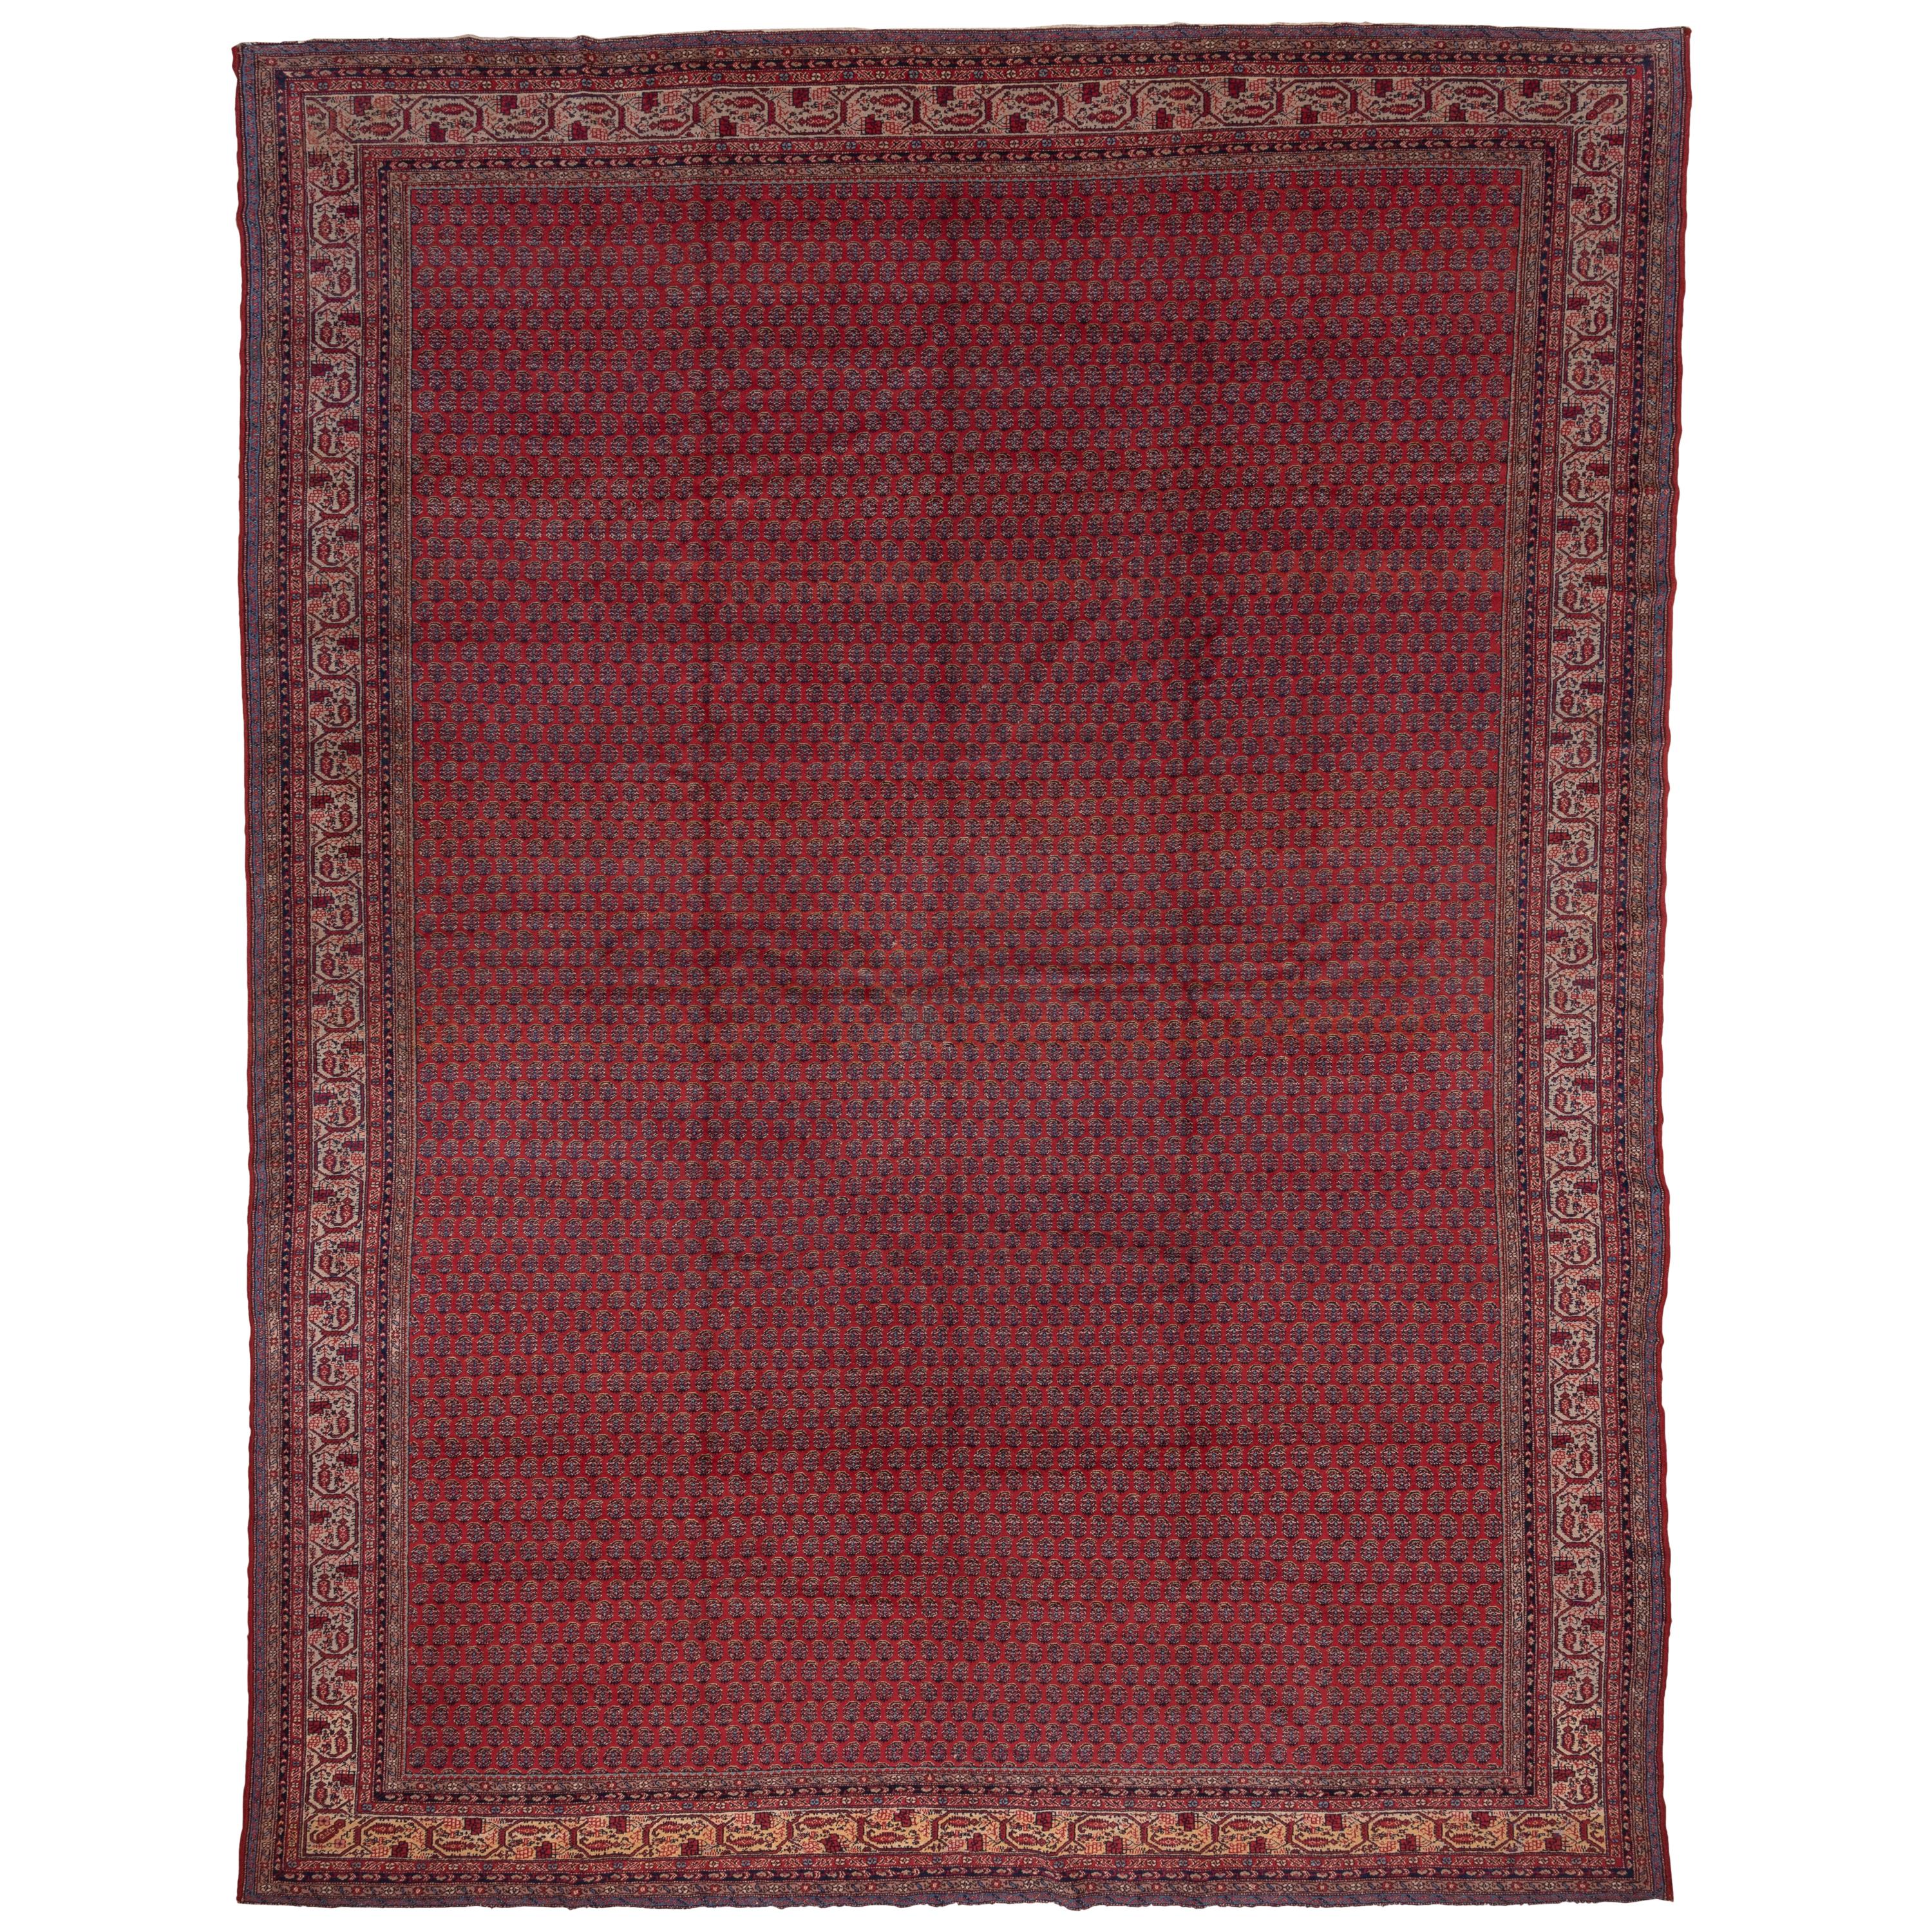 Antique Persian Saraband Carpet, Red Allover Field, Circa 1930s For Sale